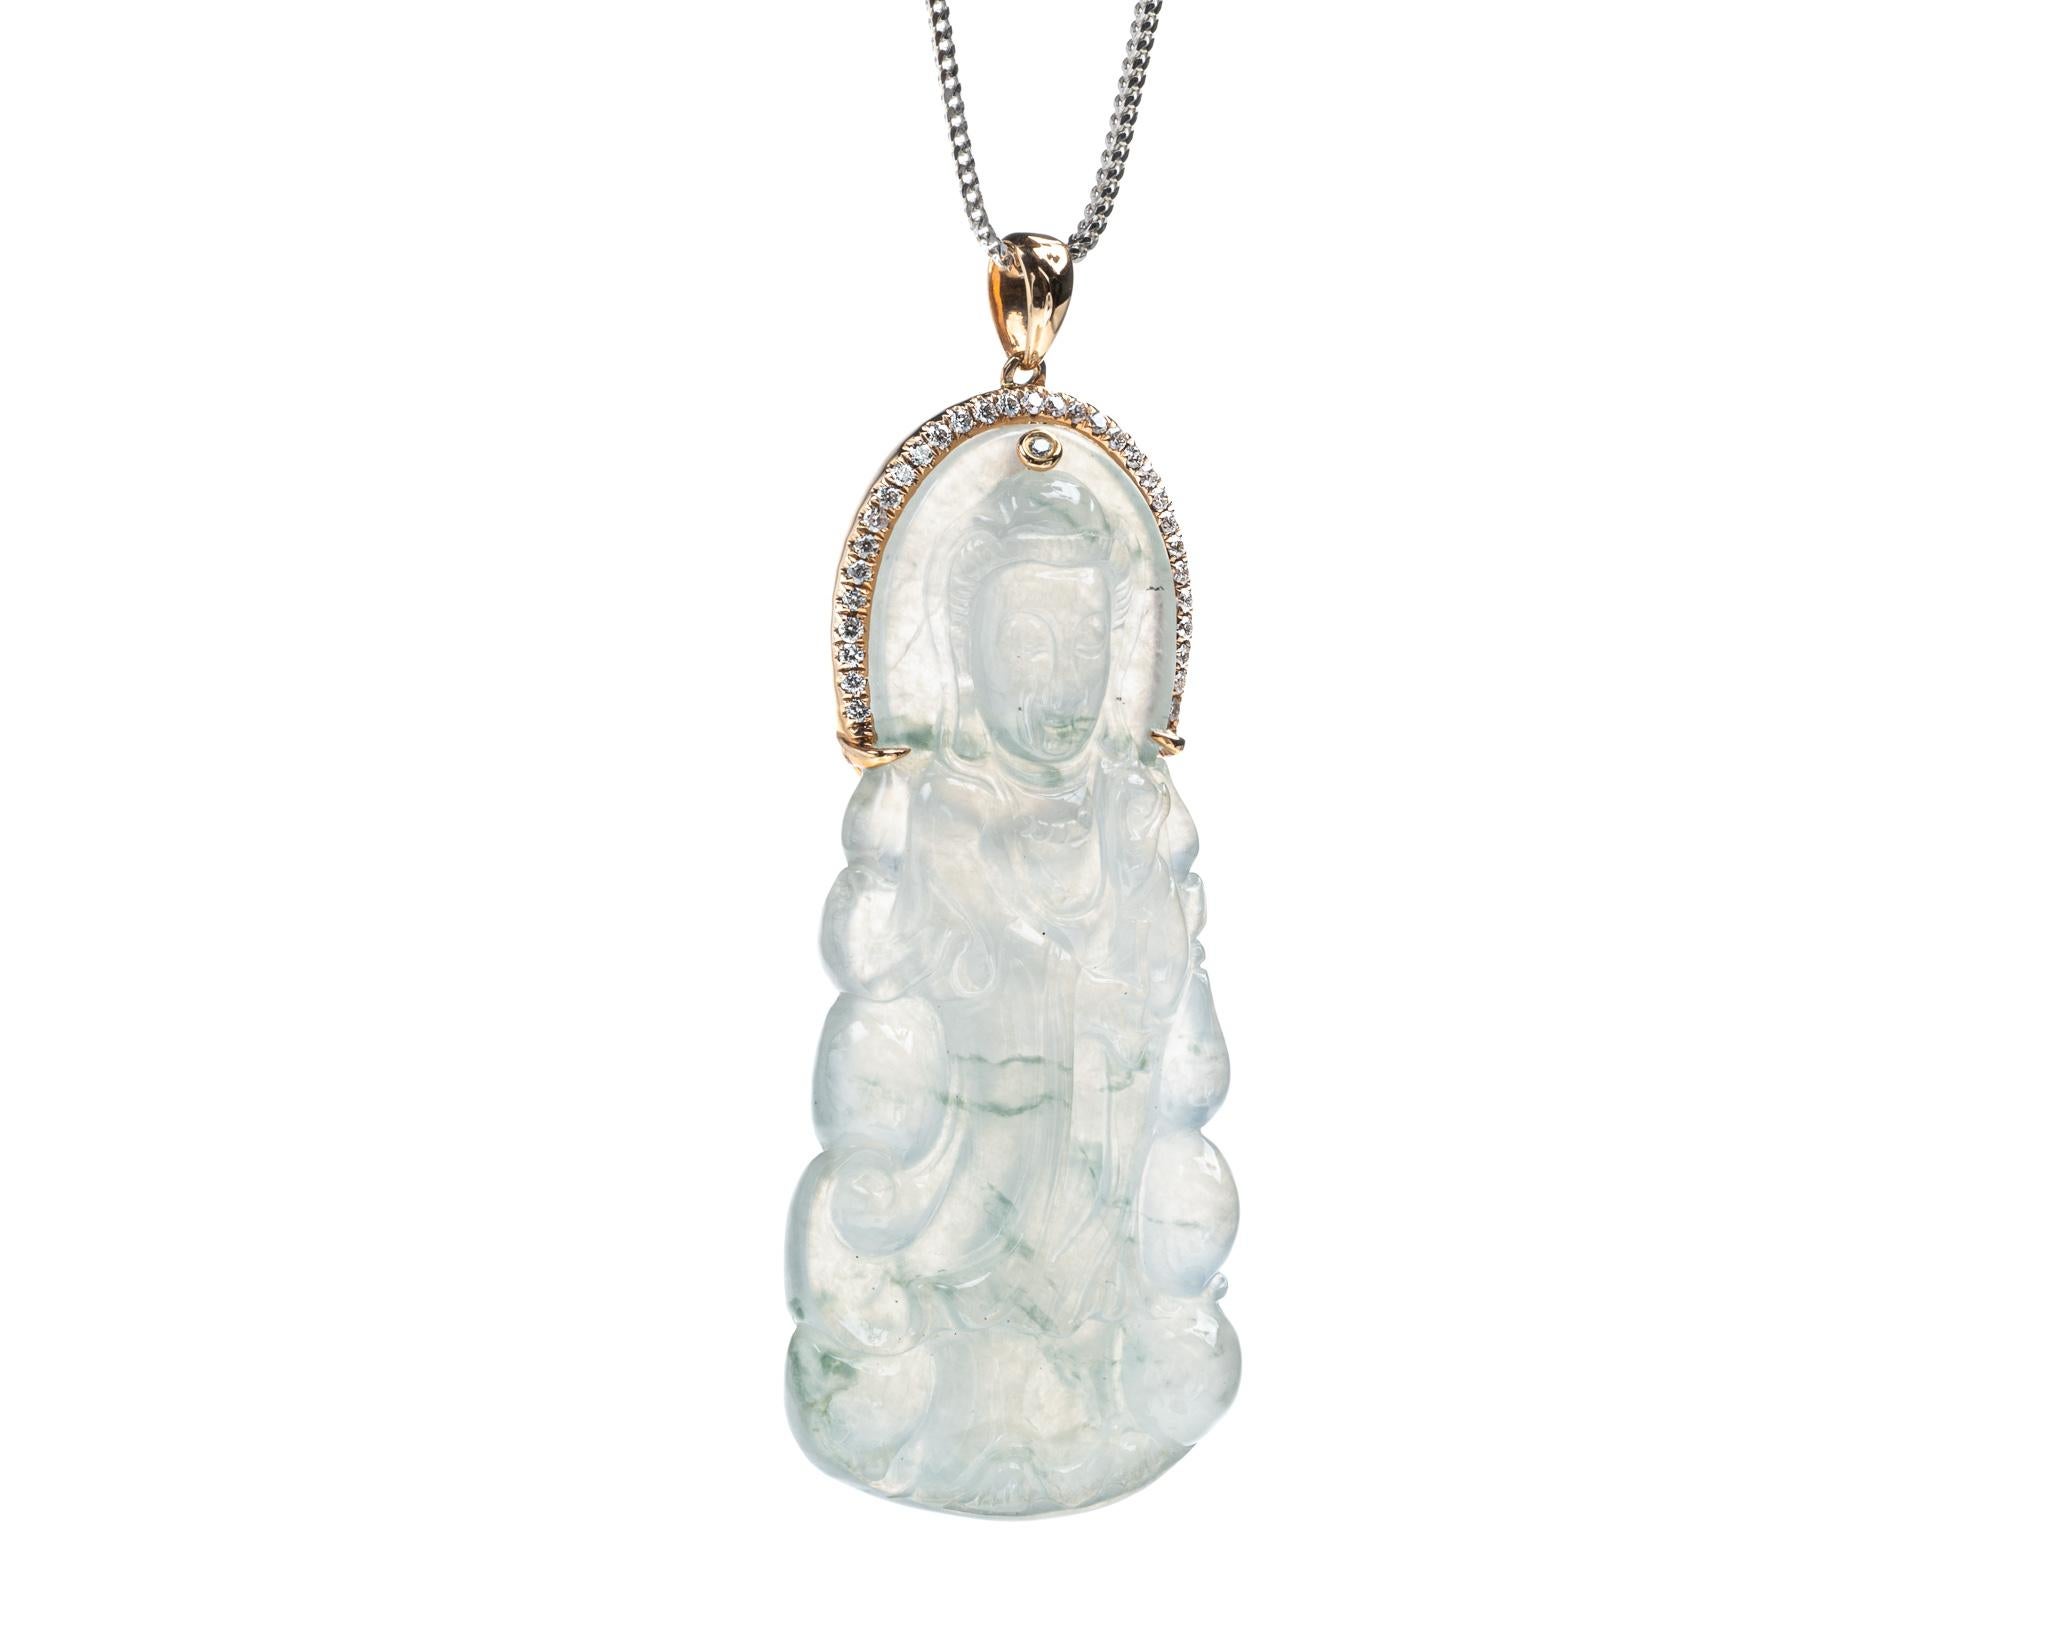 This is an all natural, untreated icy jadeite jade with green jadeite jade veins carved Quan Yin god and diamond pendant set on an 18K rose gold and diamond bail.  The carved Quan Yin god symbolizes peace and compassion.   

It measures 2.08 inches